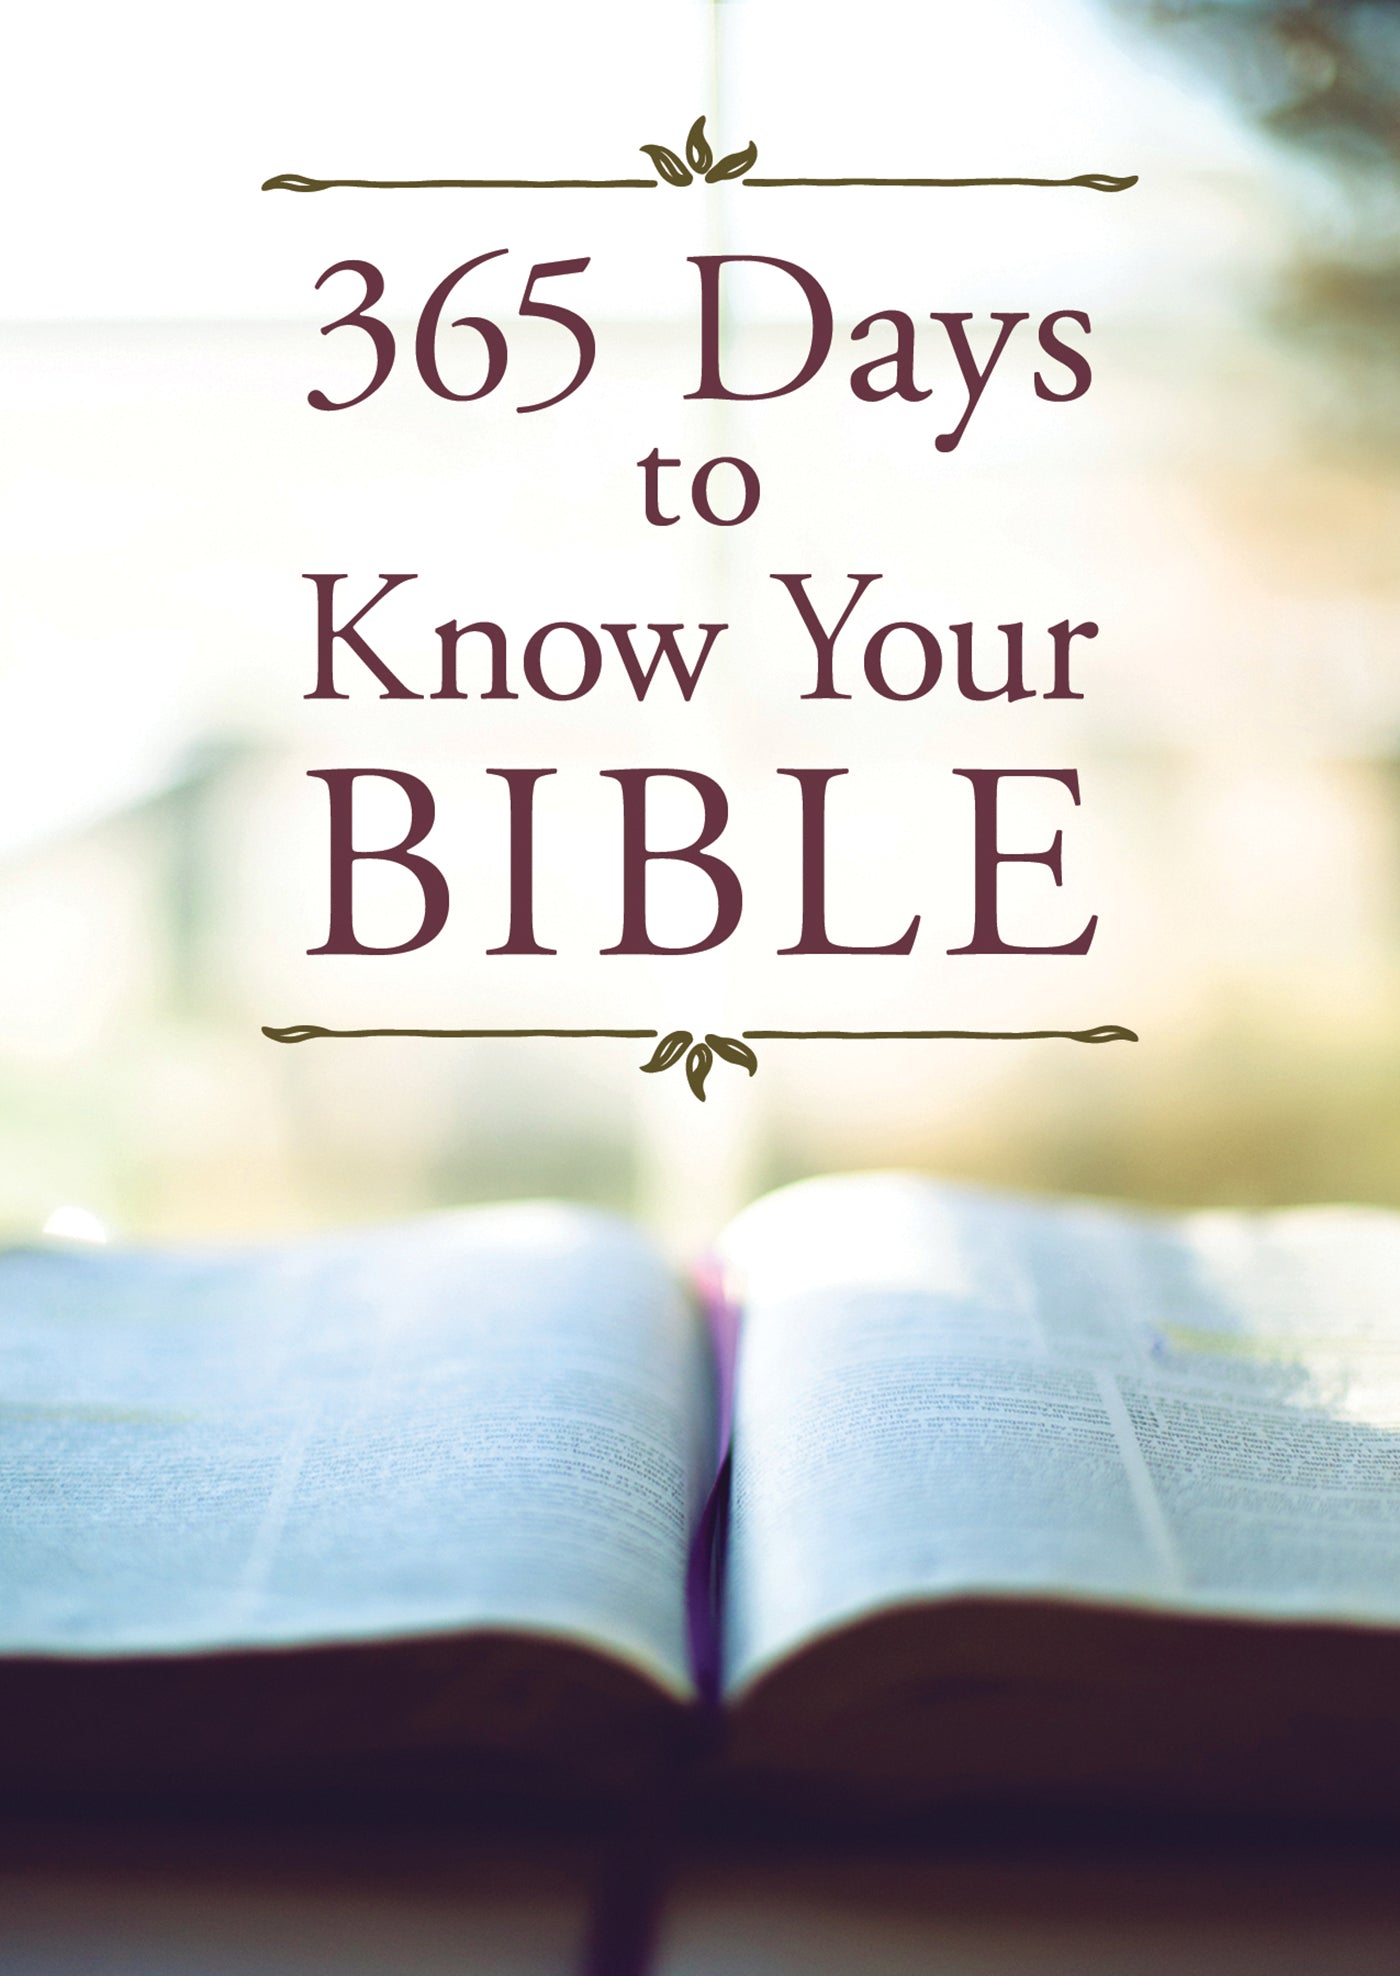 Image of 365 Days to Know Your Bible other